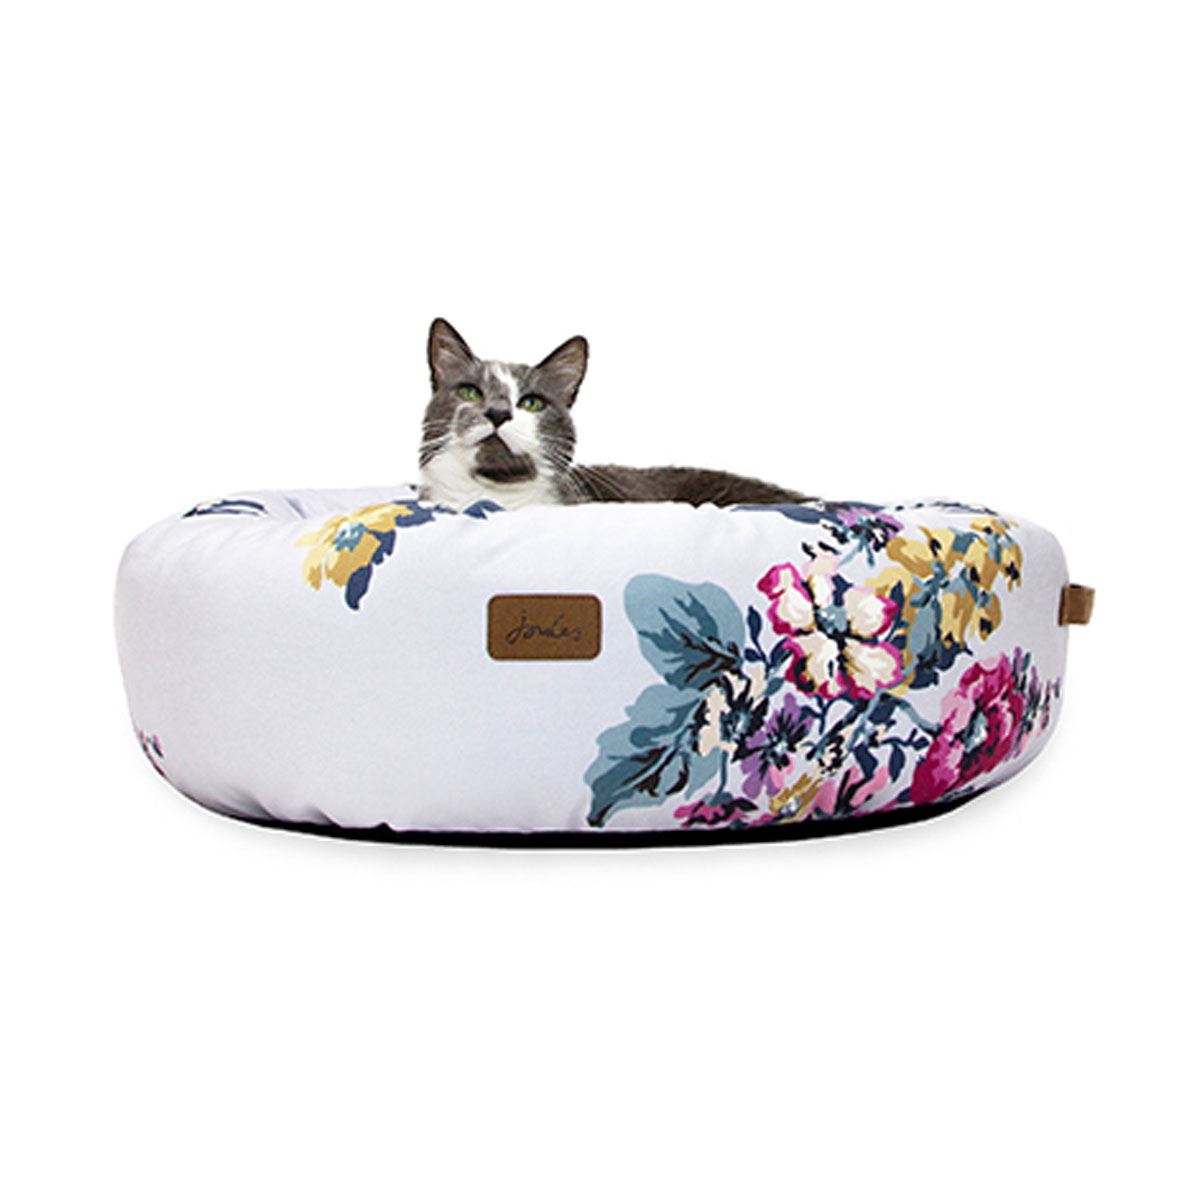 Joules Doughnut Bed - Just Horse Riders